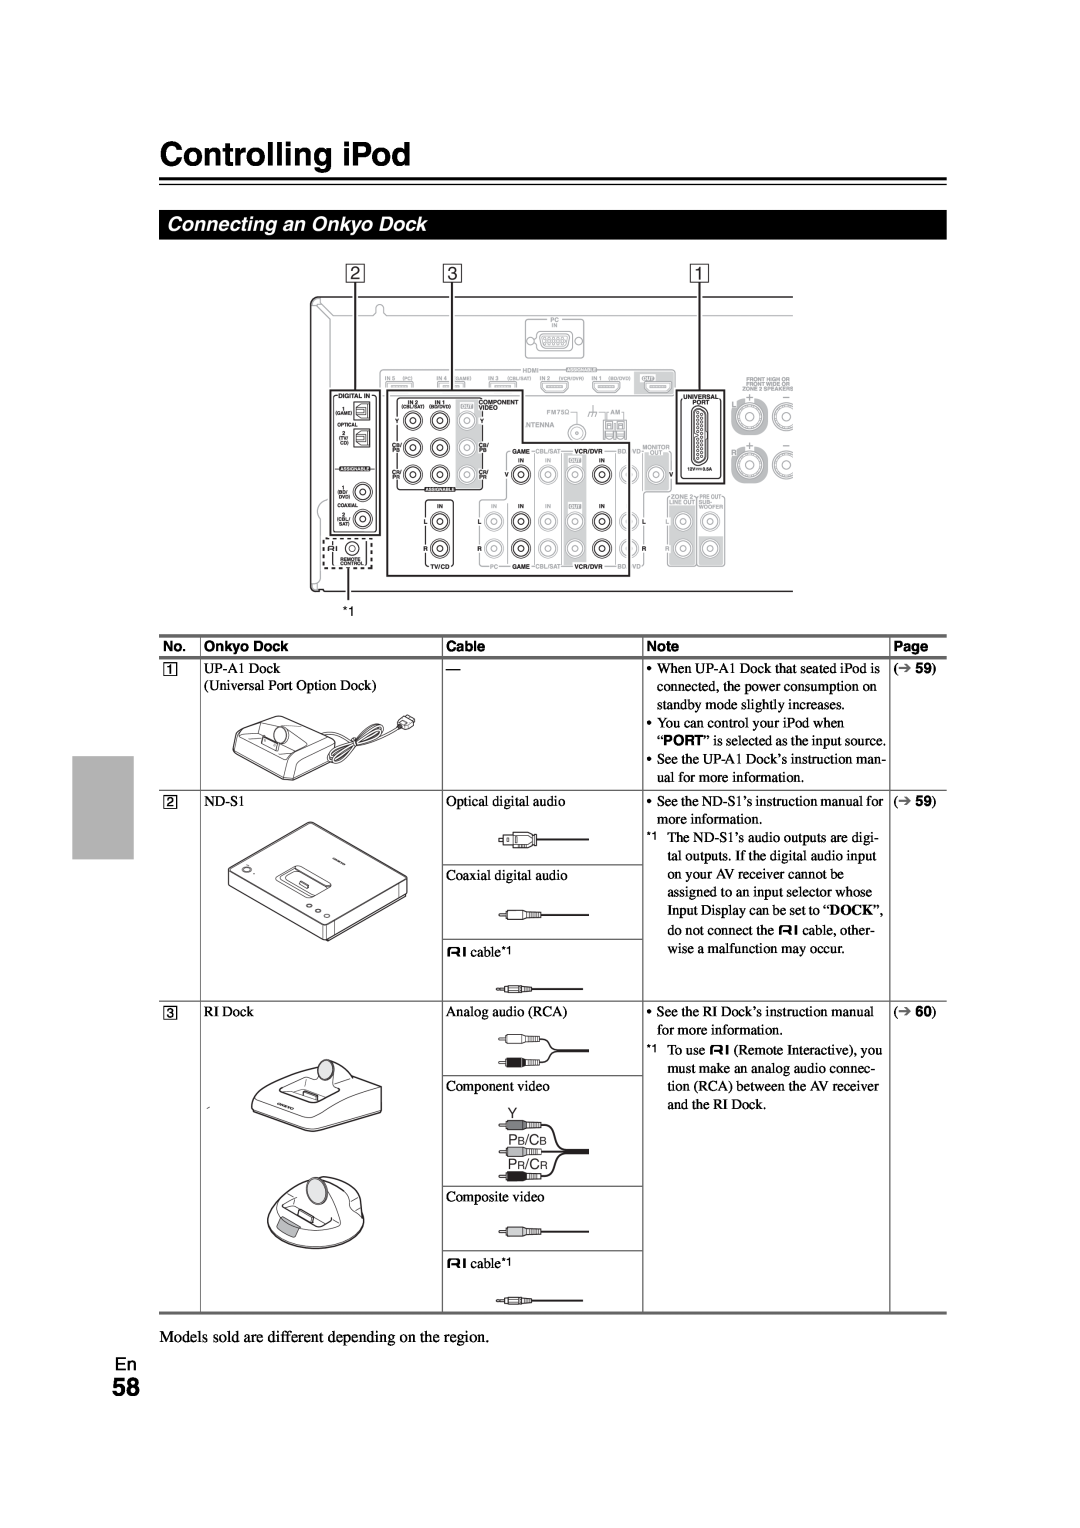 Onkyo SR608 instruction manual Controlling iPod, Connecting an Onkyo Dock 